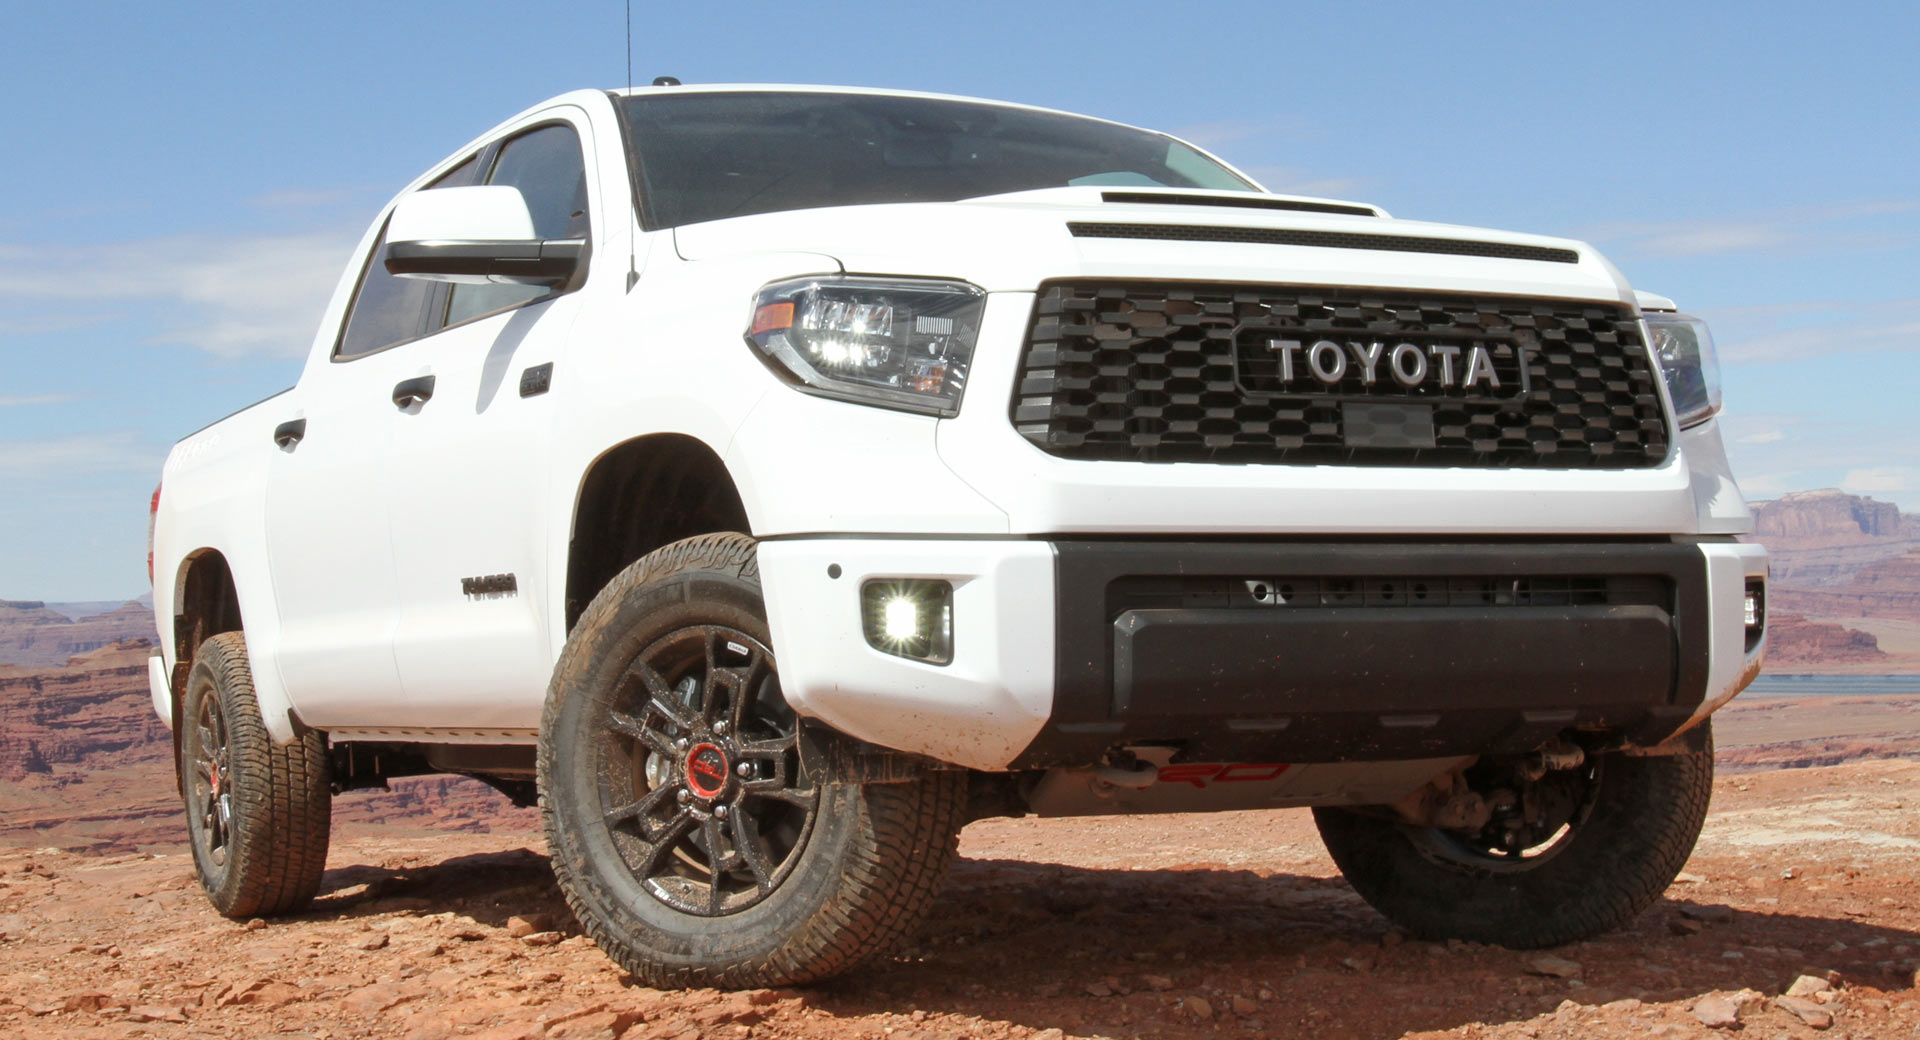 694 Good Pictures of 2011 toyota tundra for Android Wallpaper